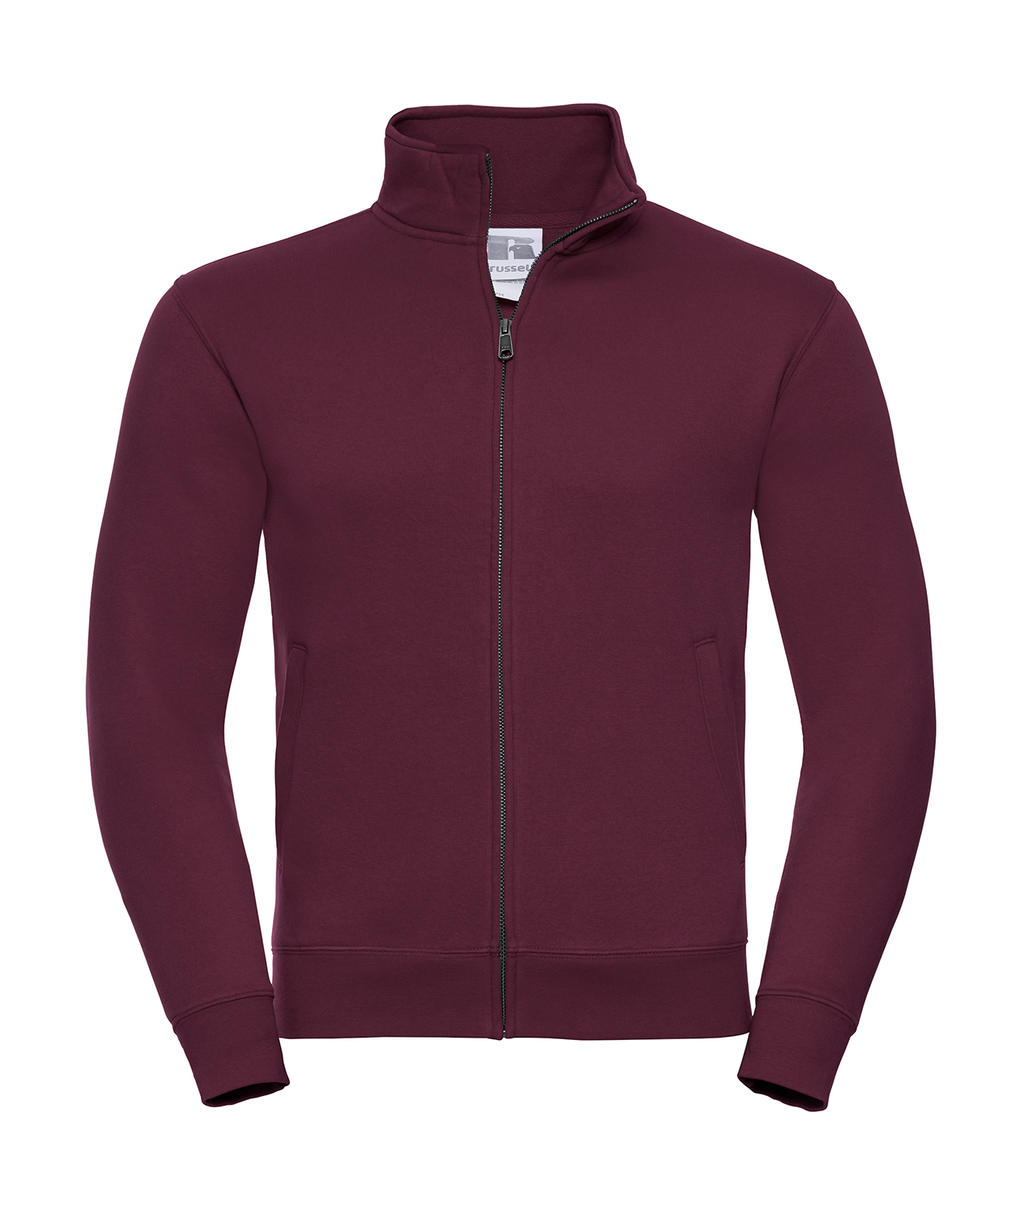  Mens Authentic Sweat Jacket in Farbe Burgundy